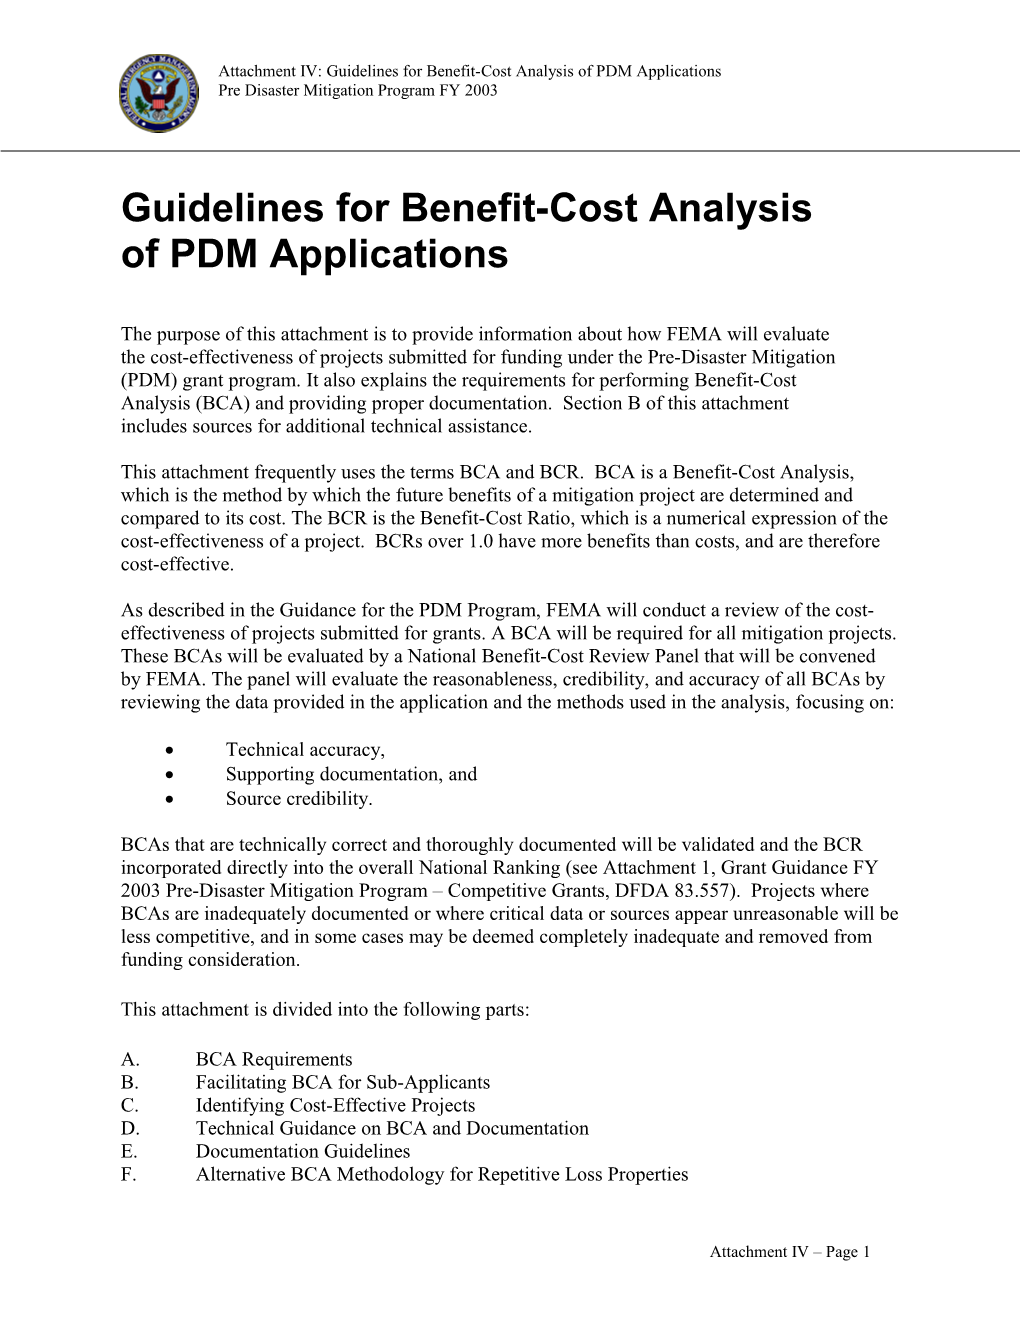 Proposed Guidelines for BCA Evaluation of PDM Applications